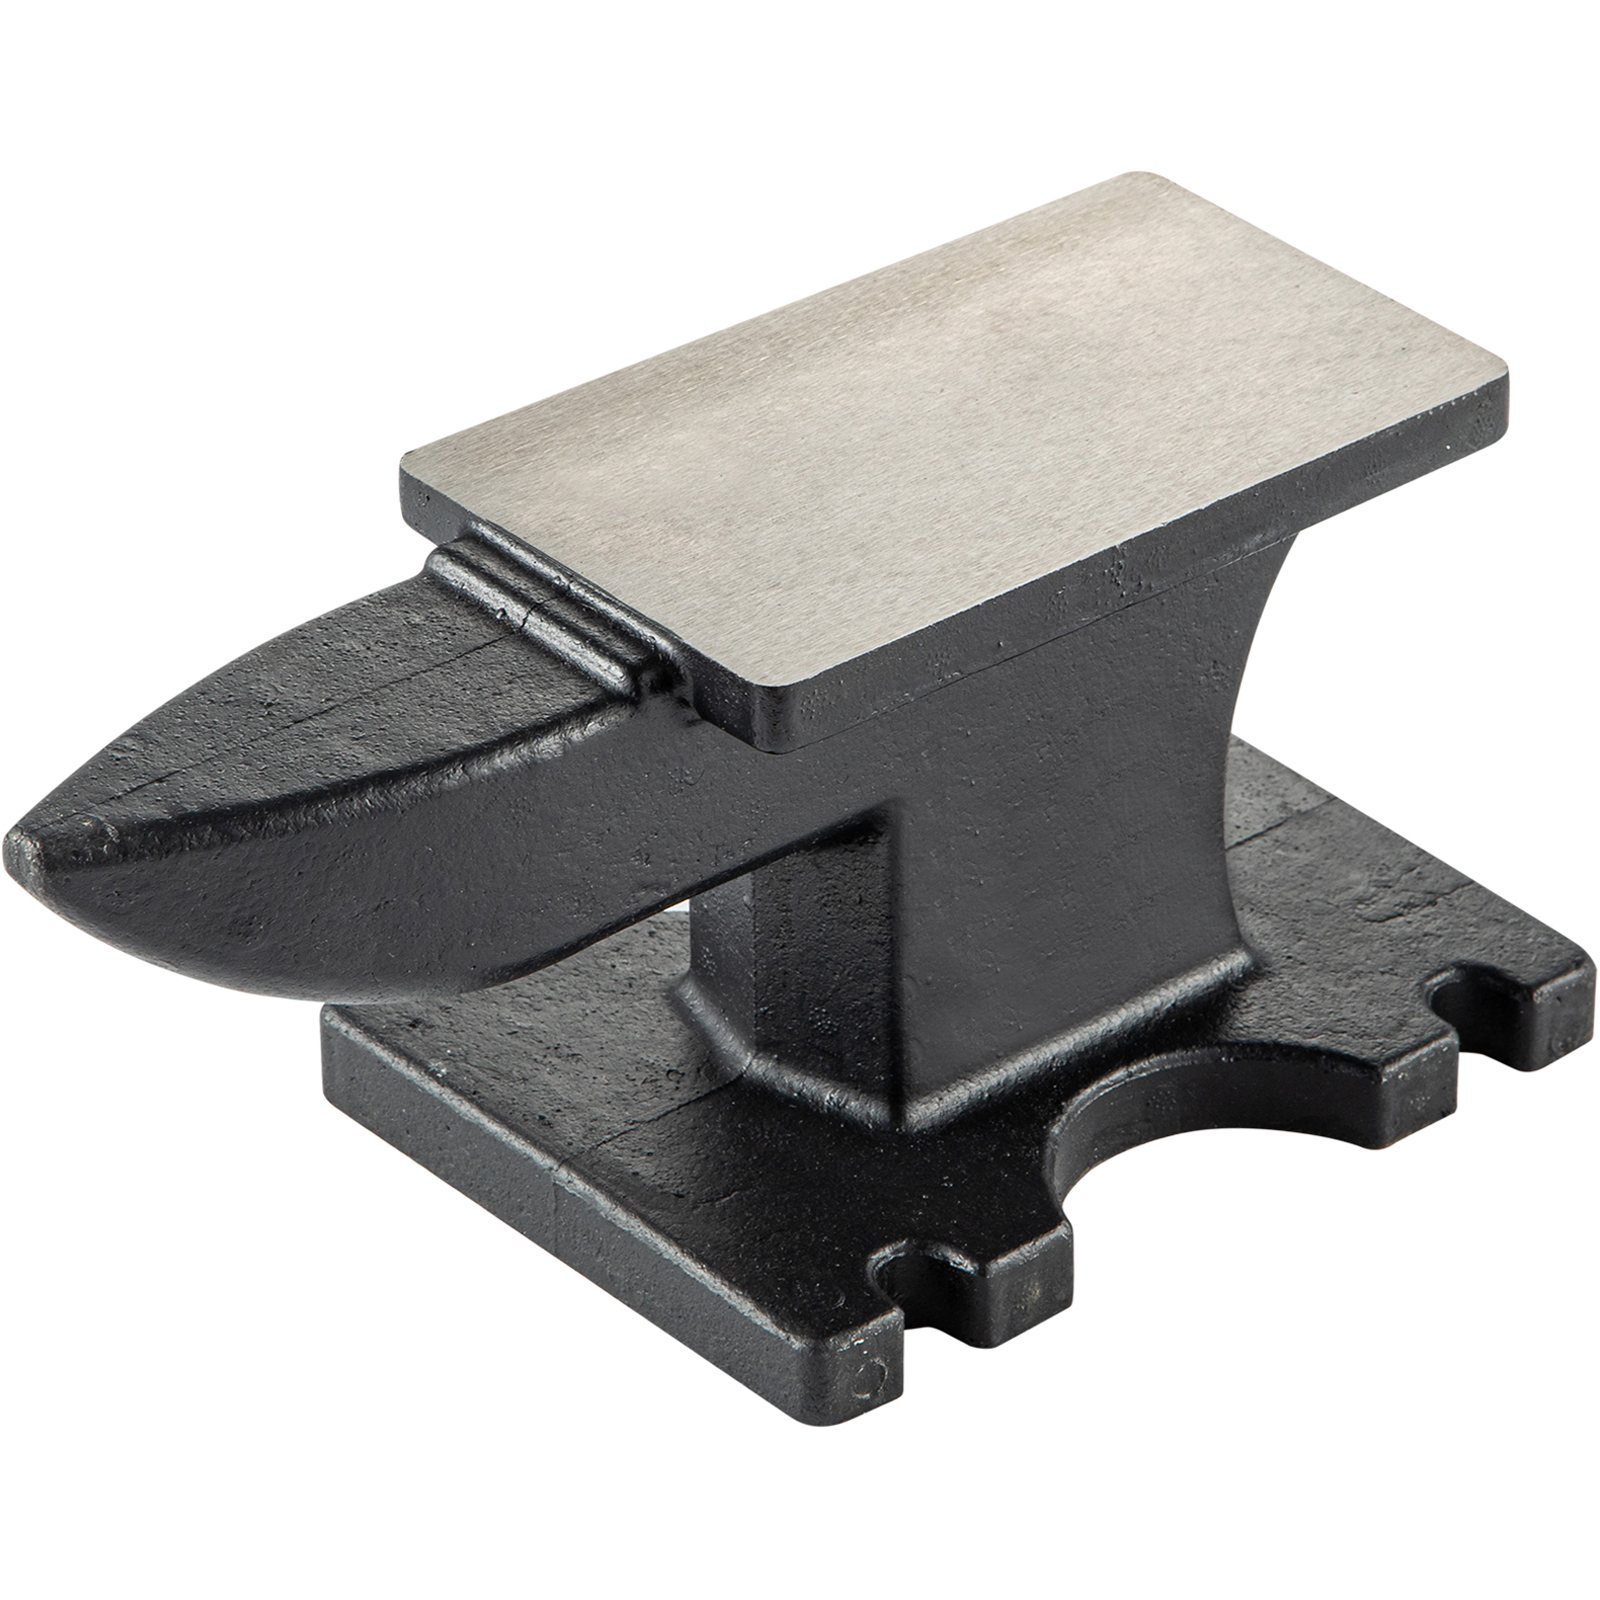 55 Lb Rugged Cast Iron Anvil for Metal Working 